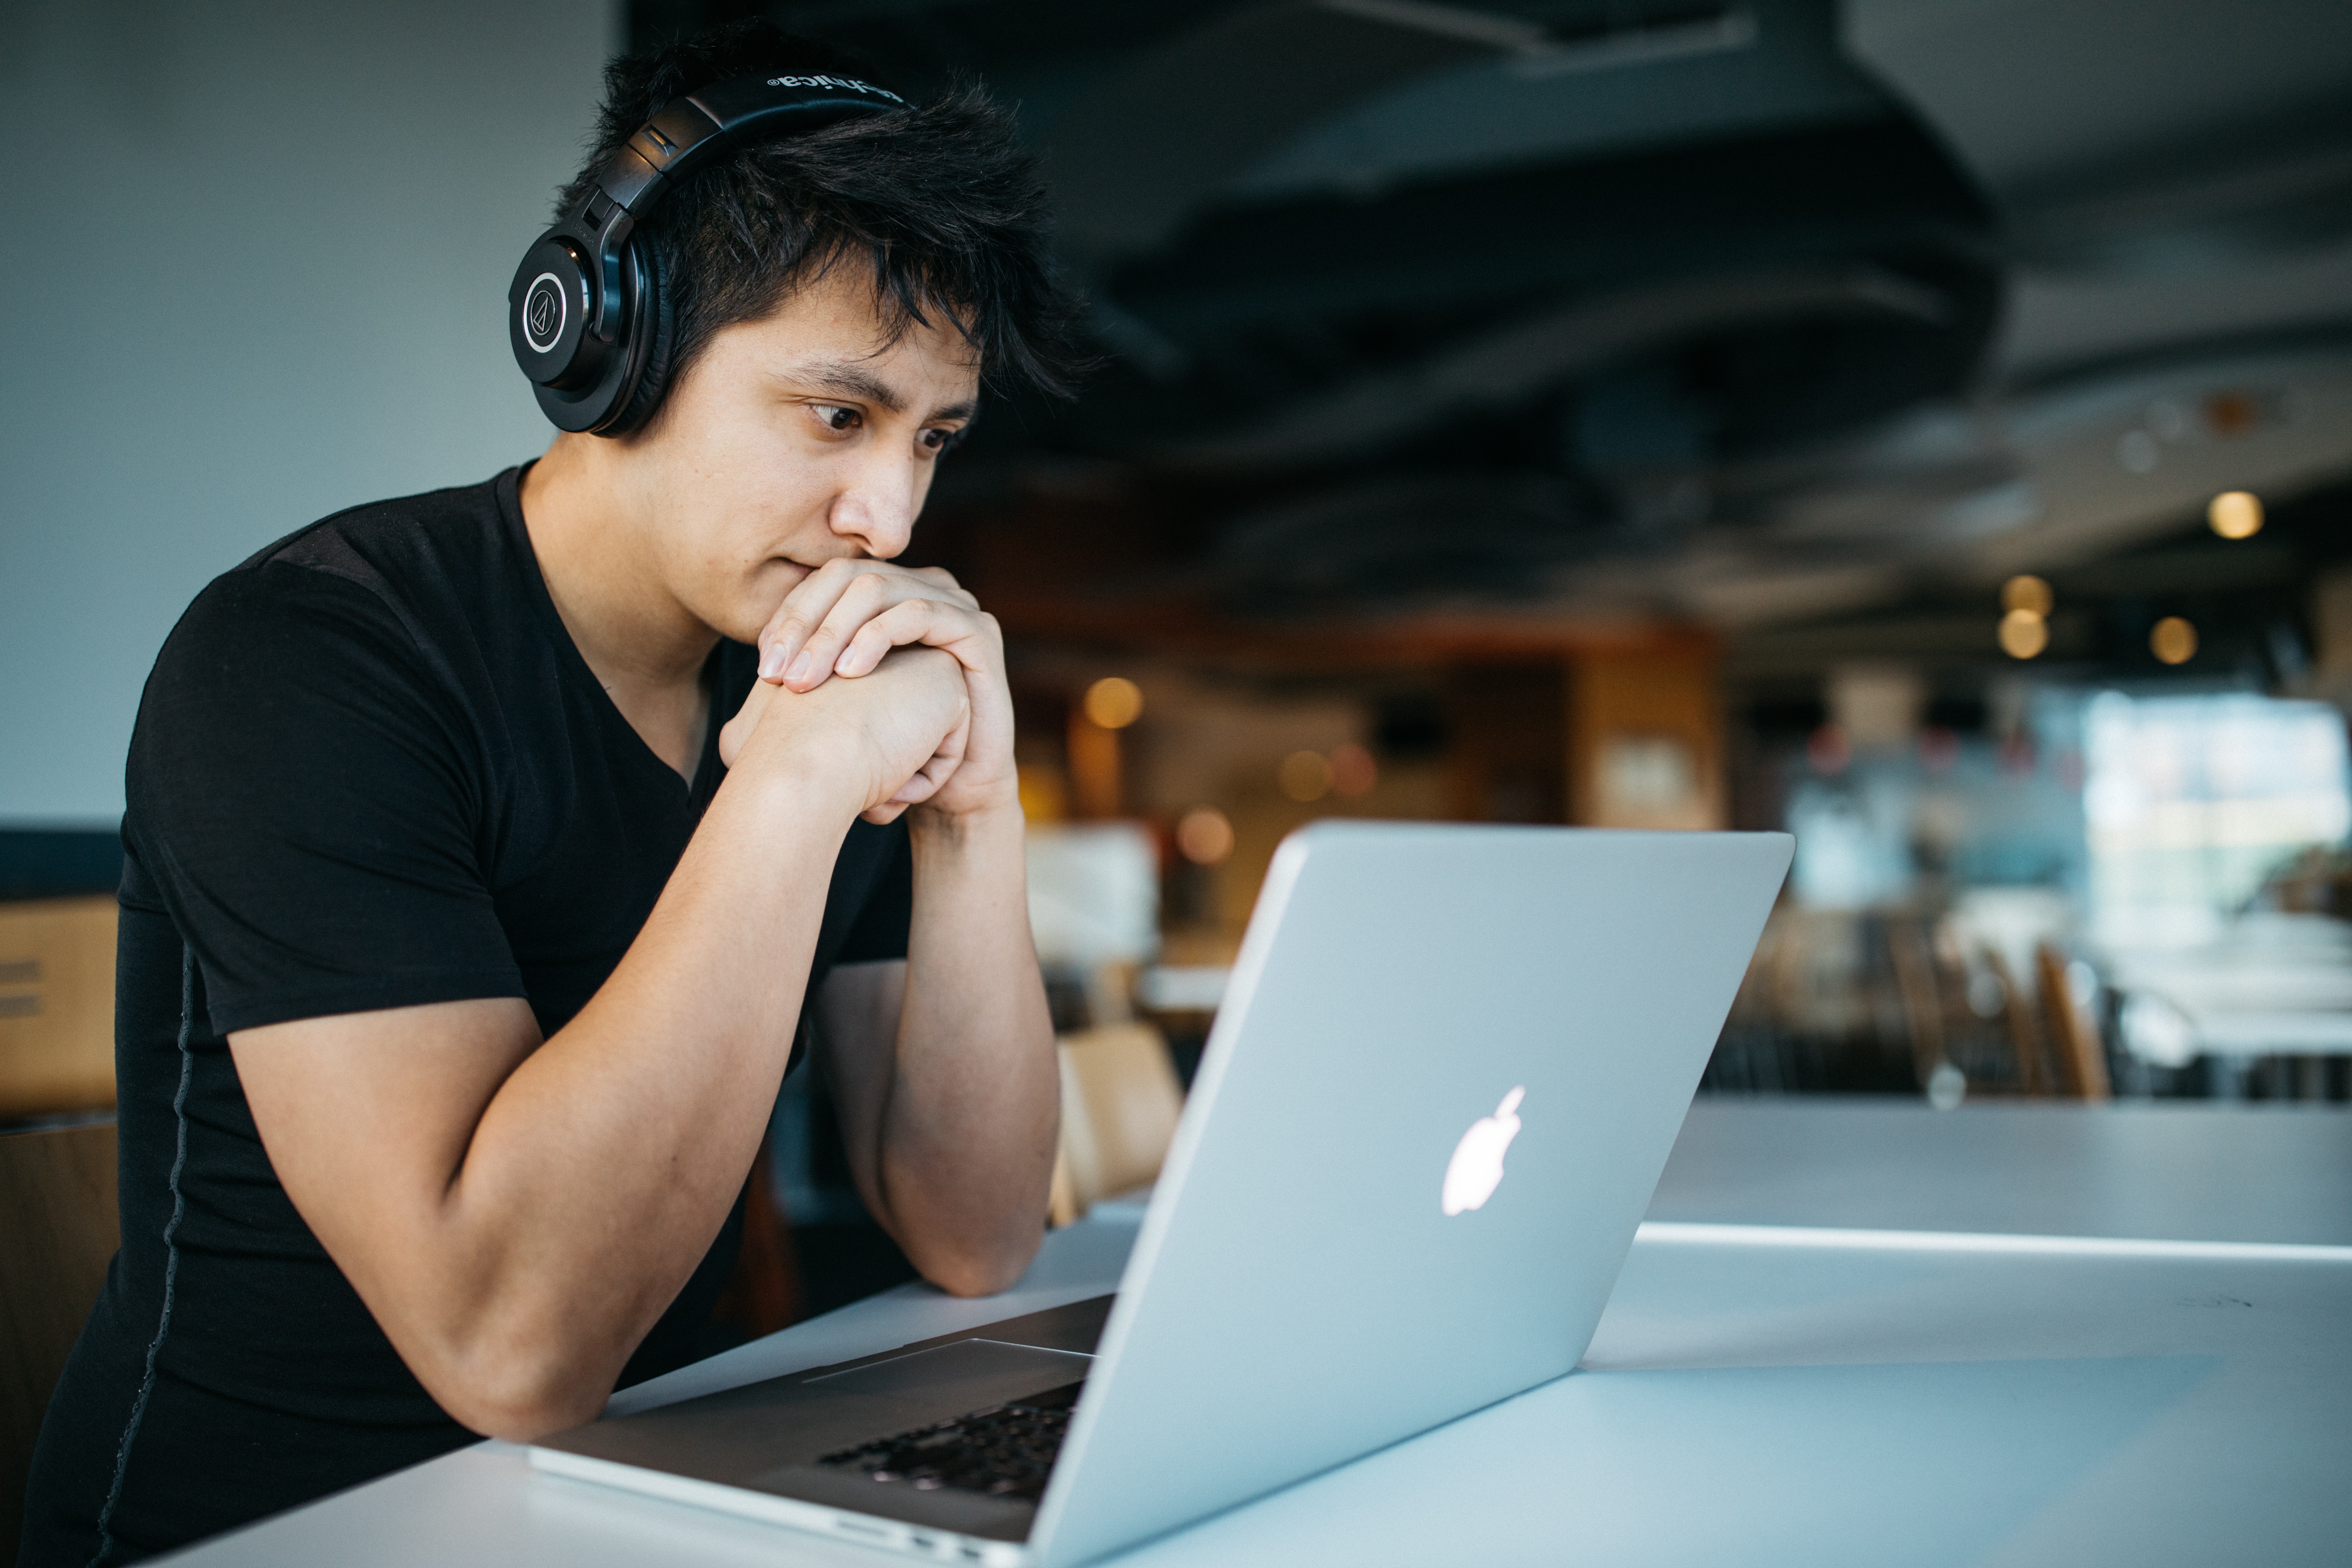 Man with headphones on looking at a laptop